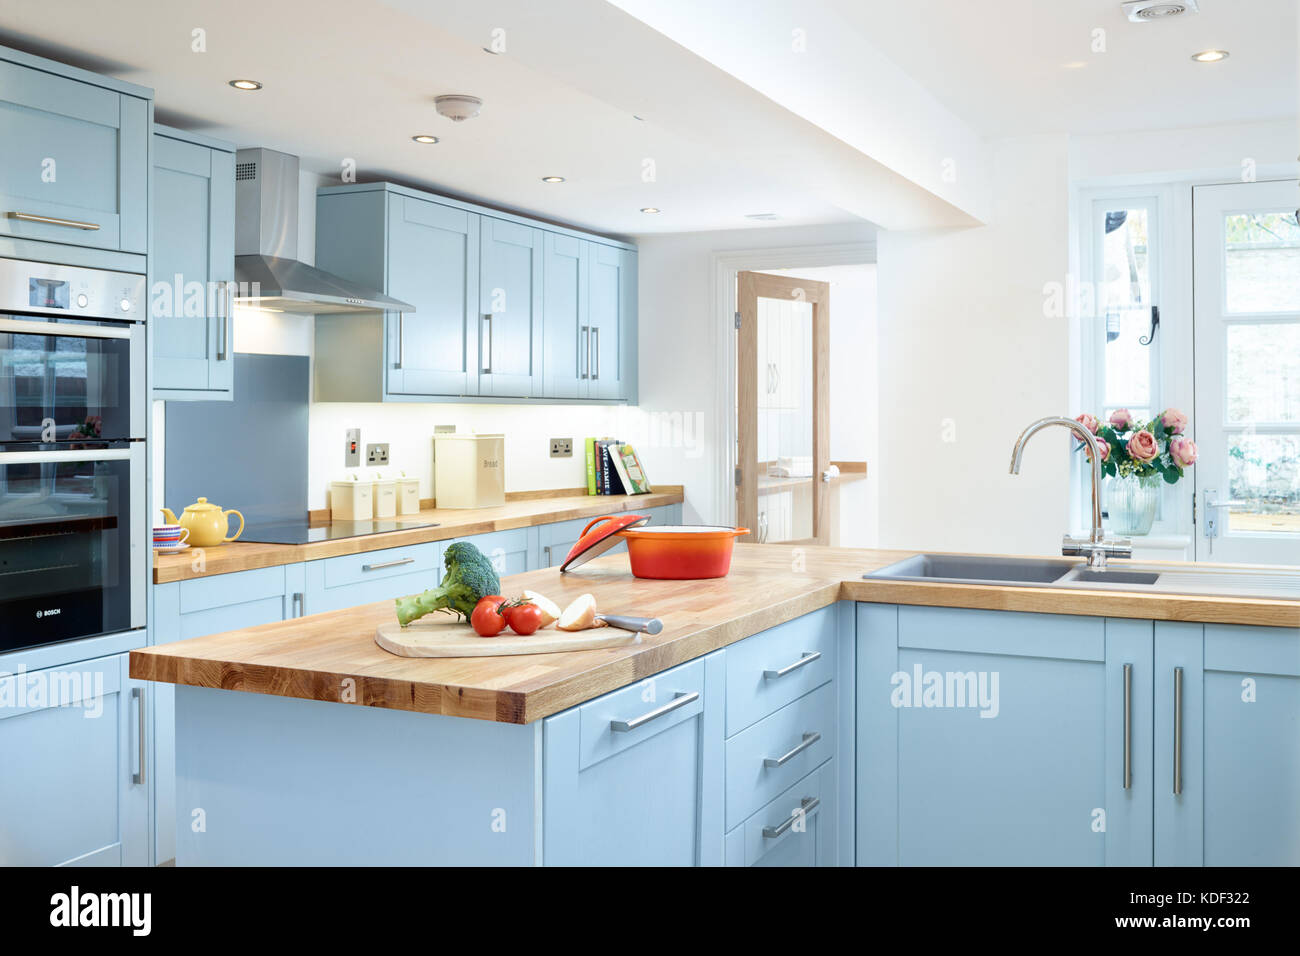 A new, modern, blue, shaker style designer kitchen showing cabinets, appliances and counter top. With some food preparation Stock Photo